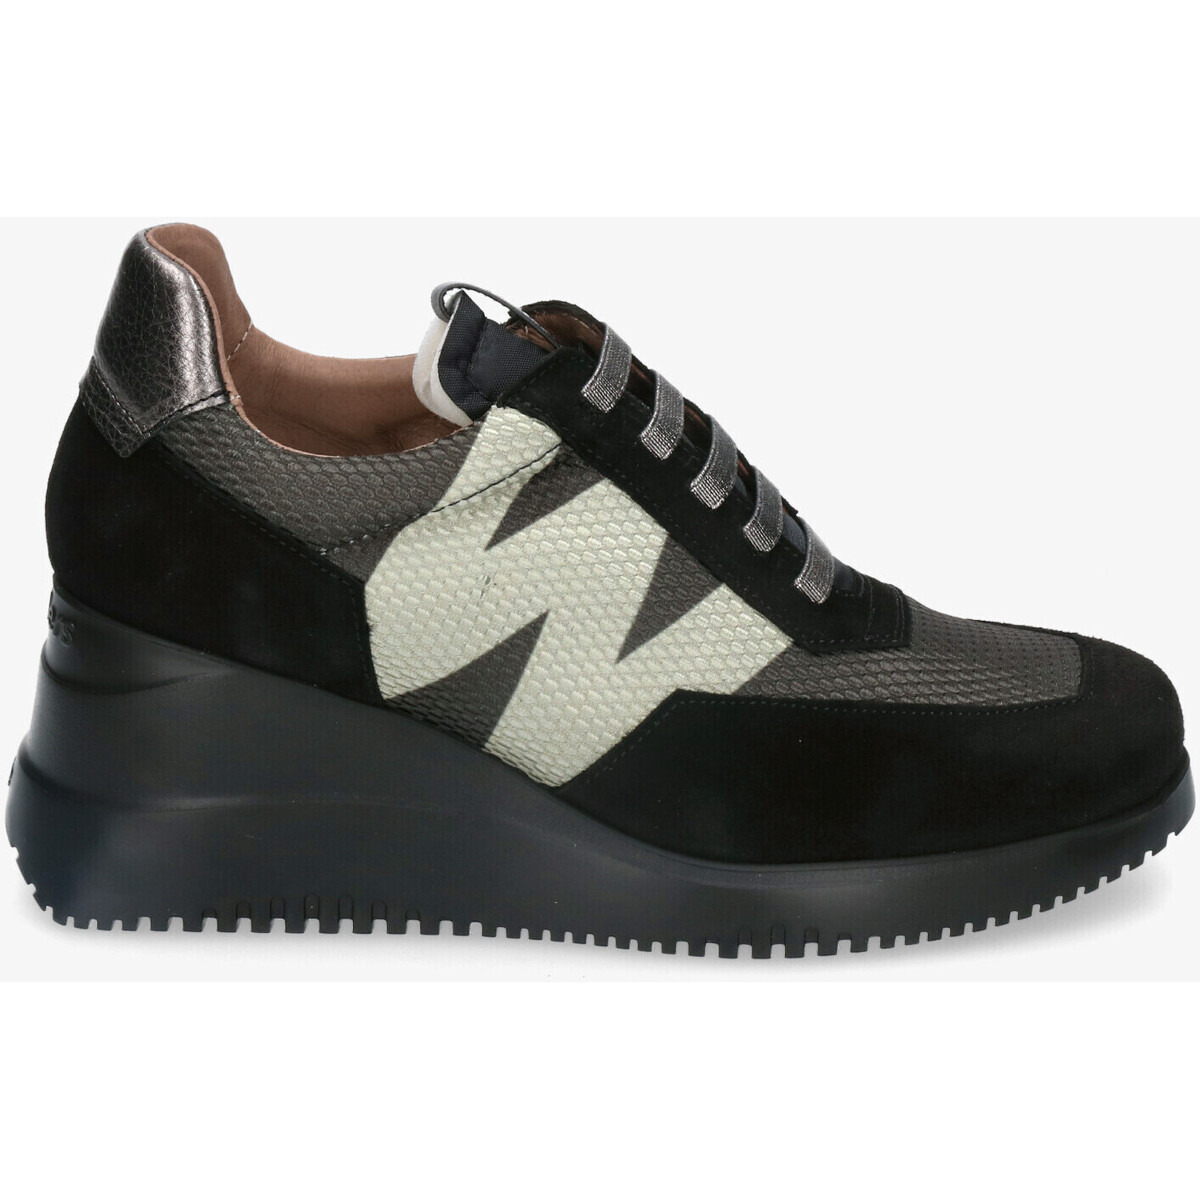 Sneakers Black for Woman at Spartoo GOOFASH